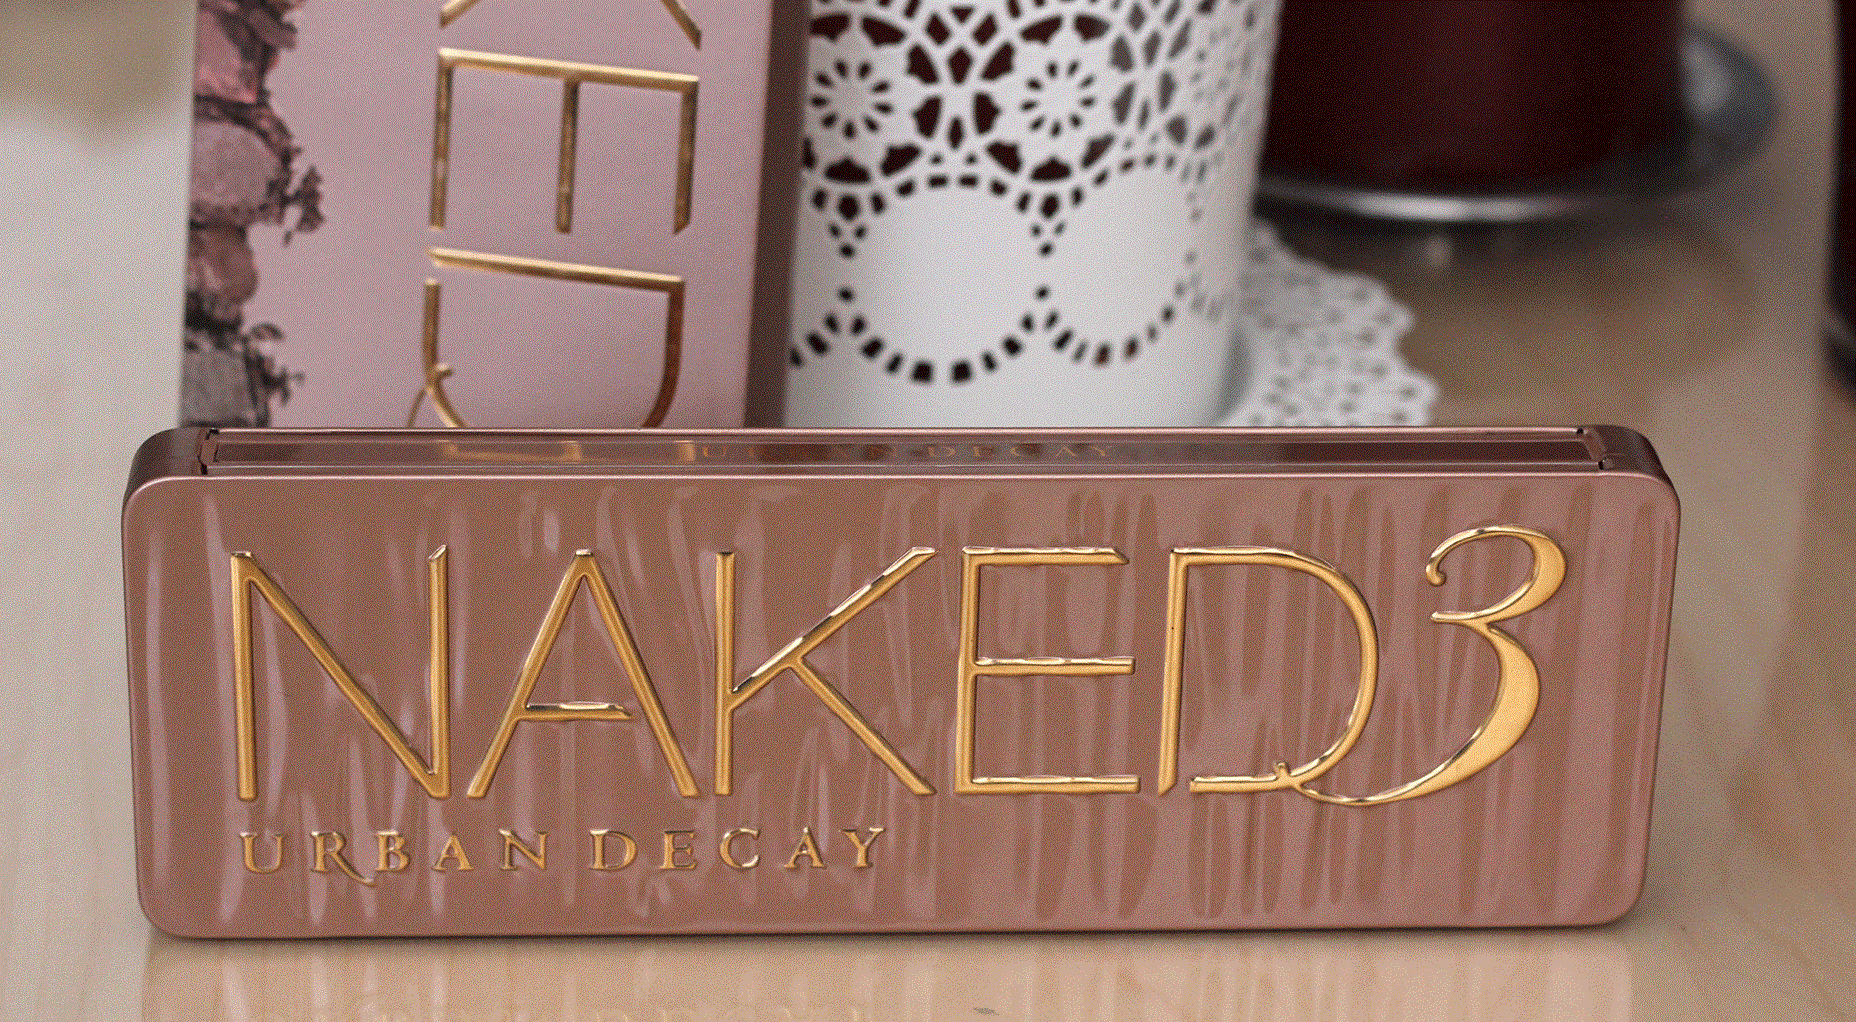 Naked by Urban Decay - an extension of L'oreal